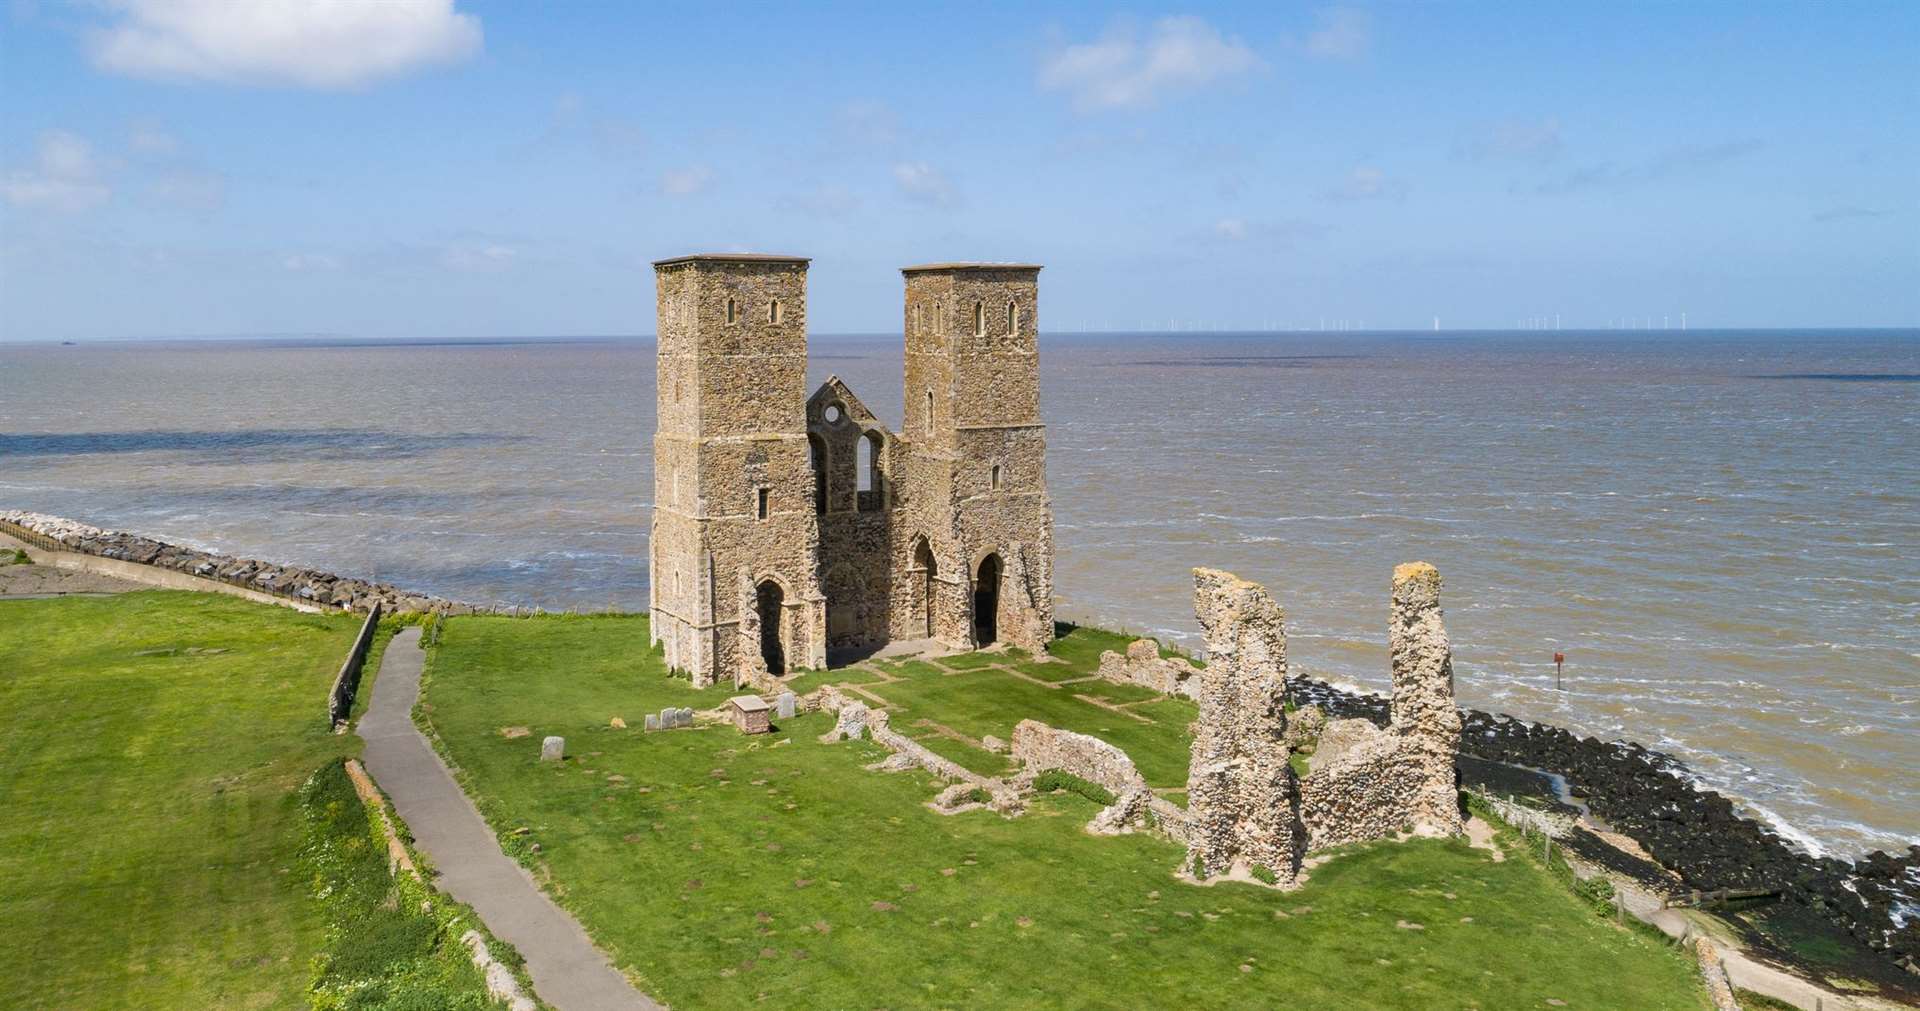 The imposing twin towers at Reculver dominate the skyline of the North Kent coast, acting as a navigation marker for ships at sea